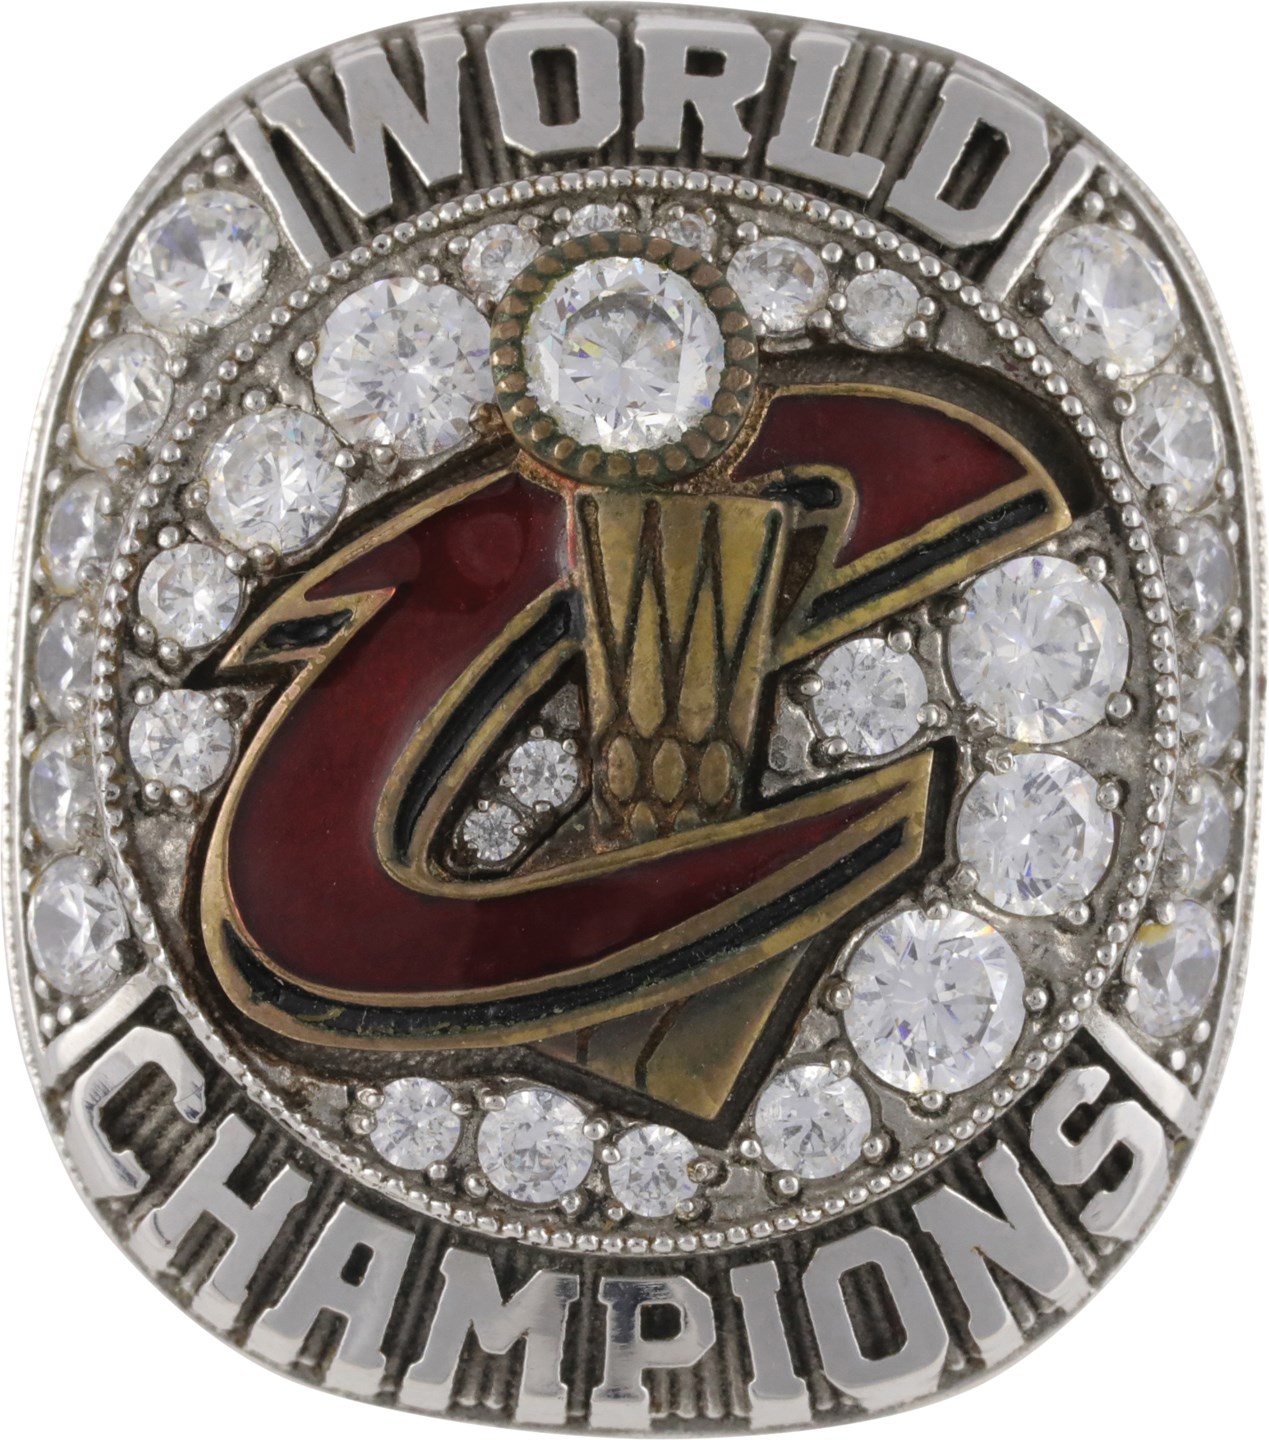 2016 Cleveland Cavaliers Championship Staff Ring